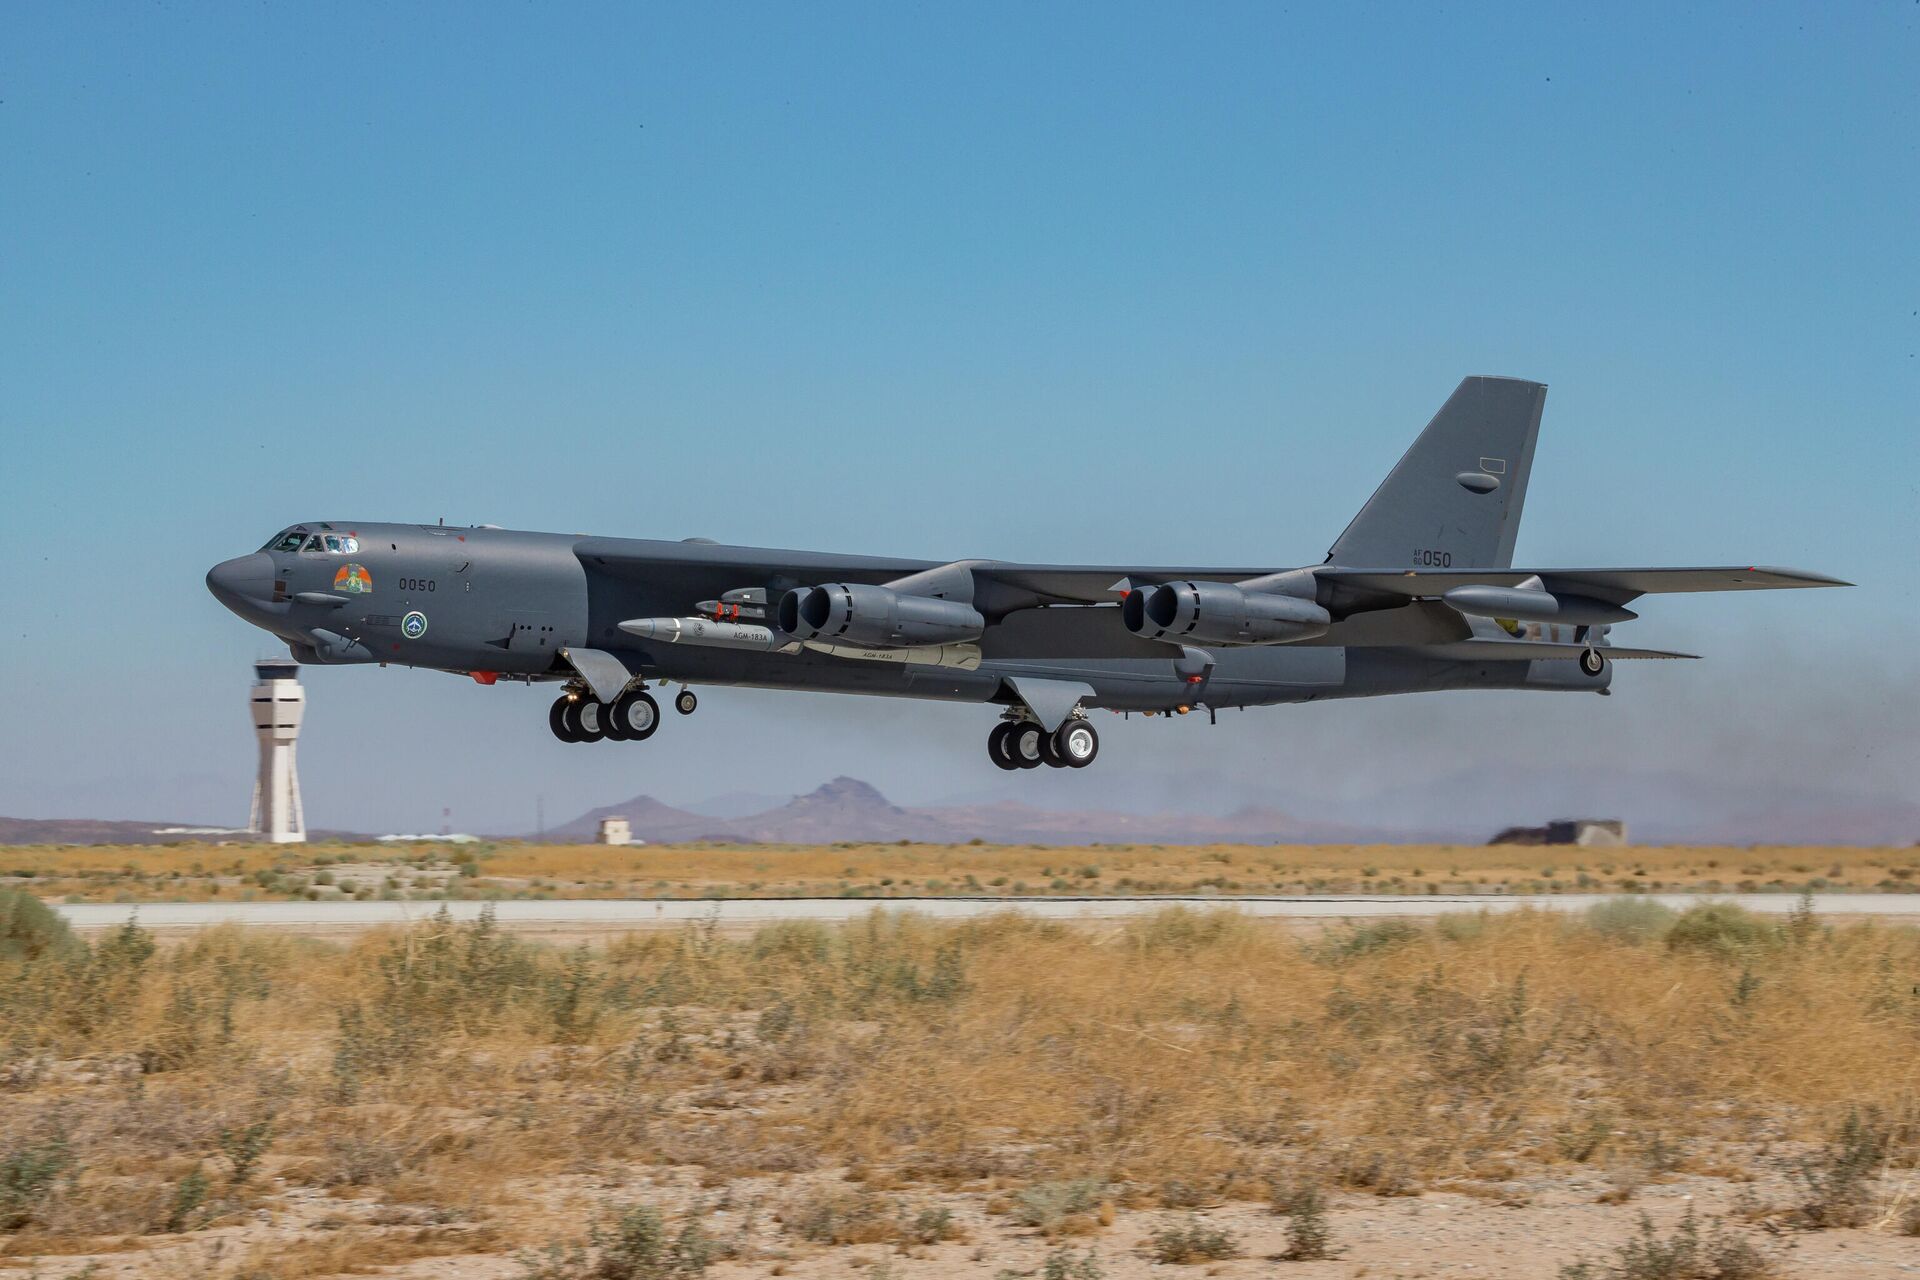 American B-52H Stratofortress bomber with AGM-183A hypersonic cruise missile